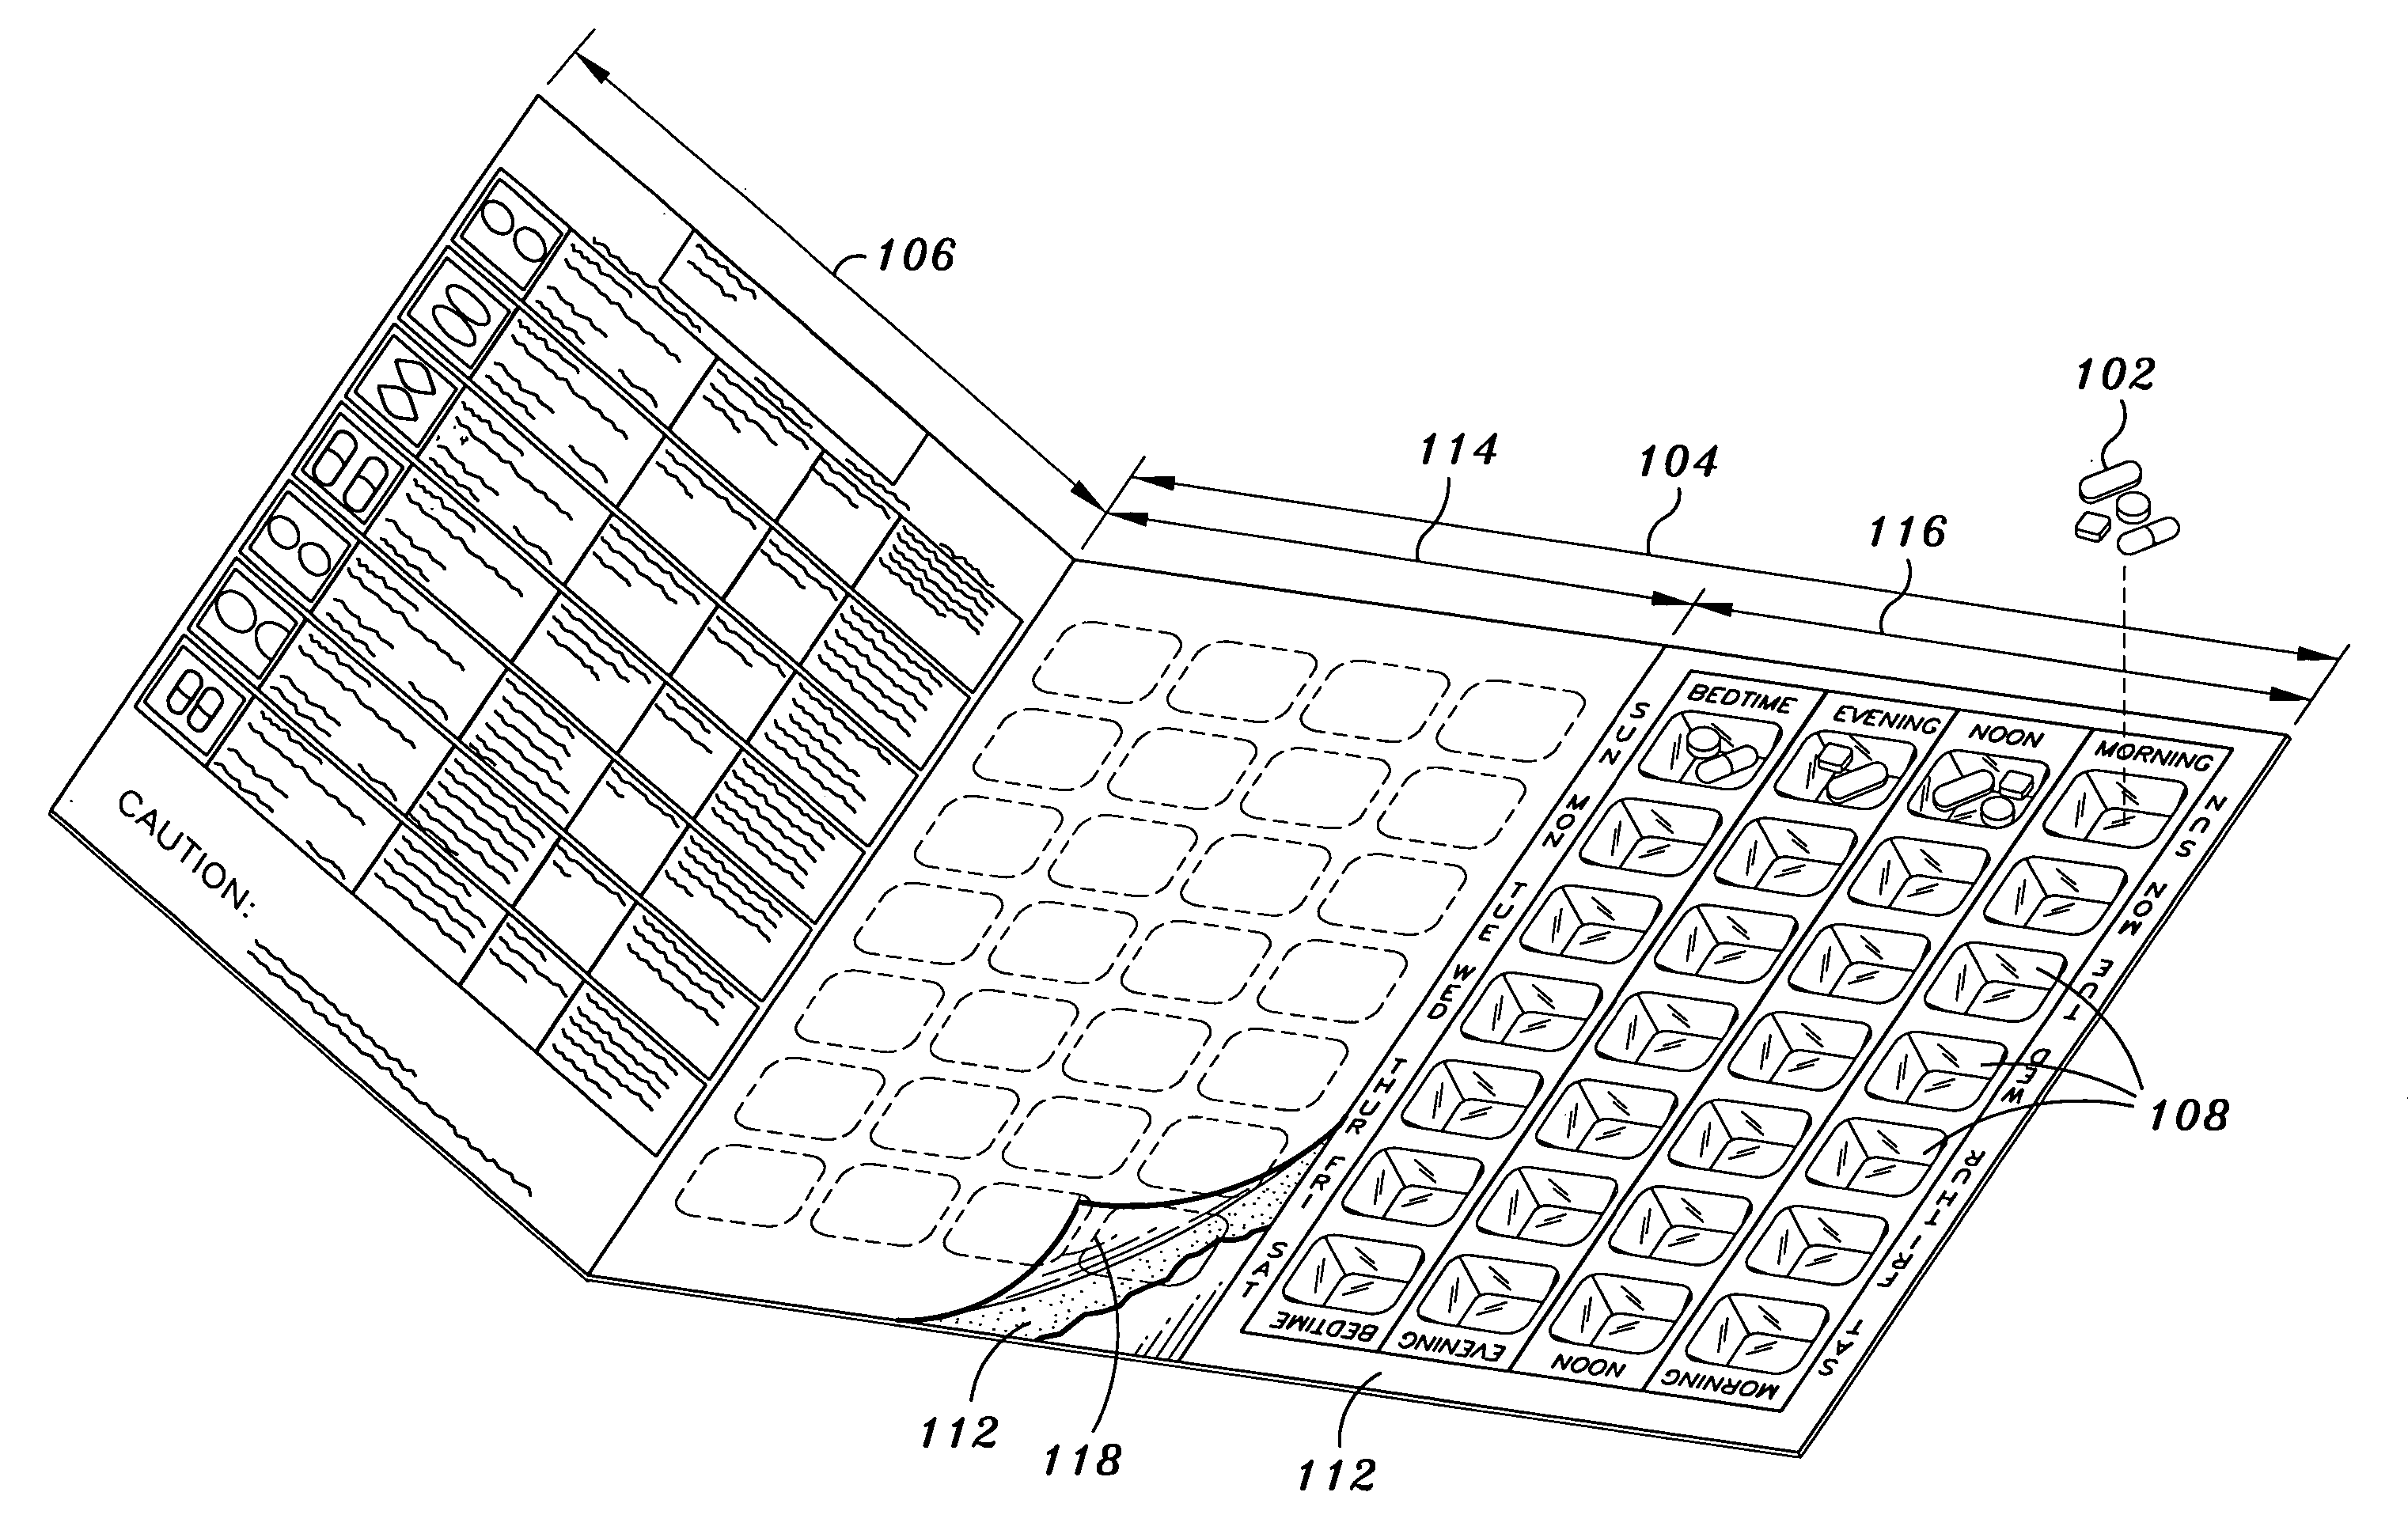 Medication compliance and management device